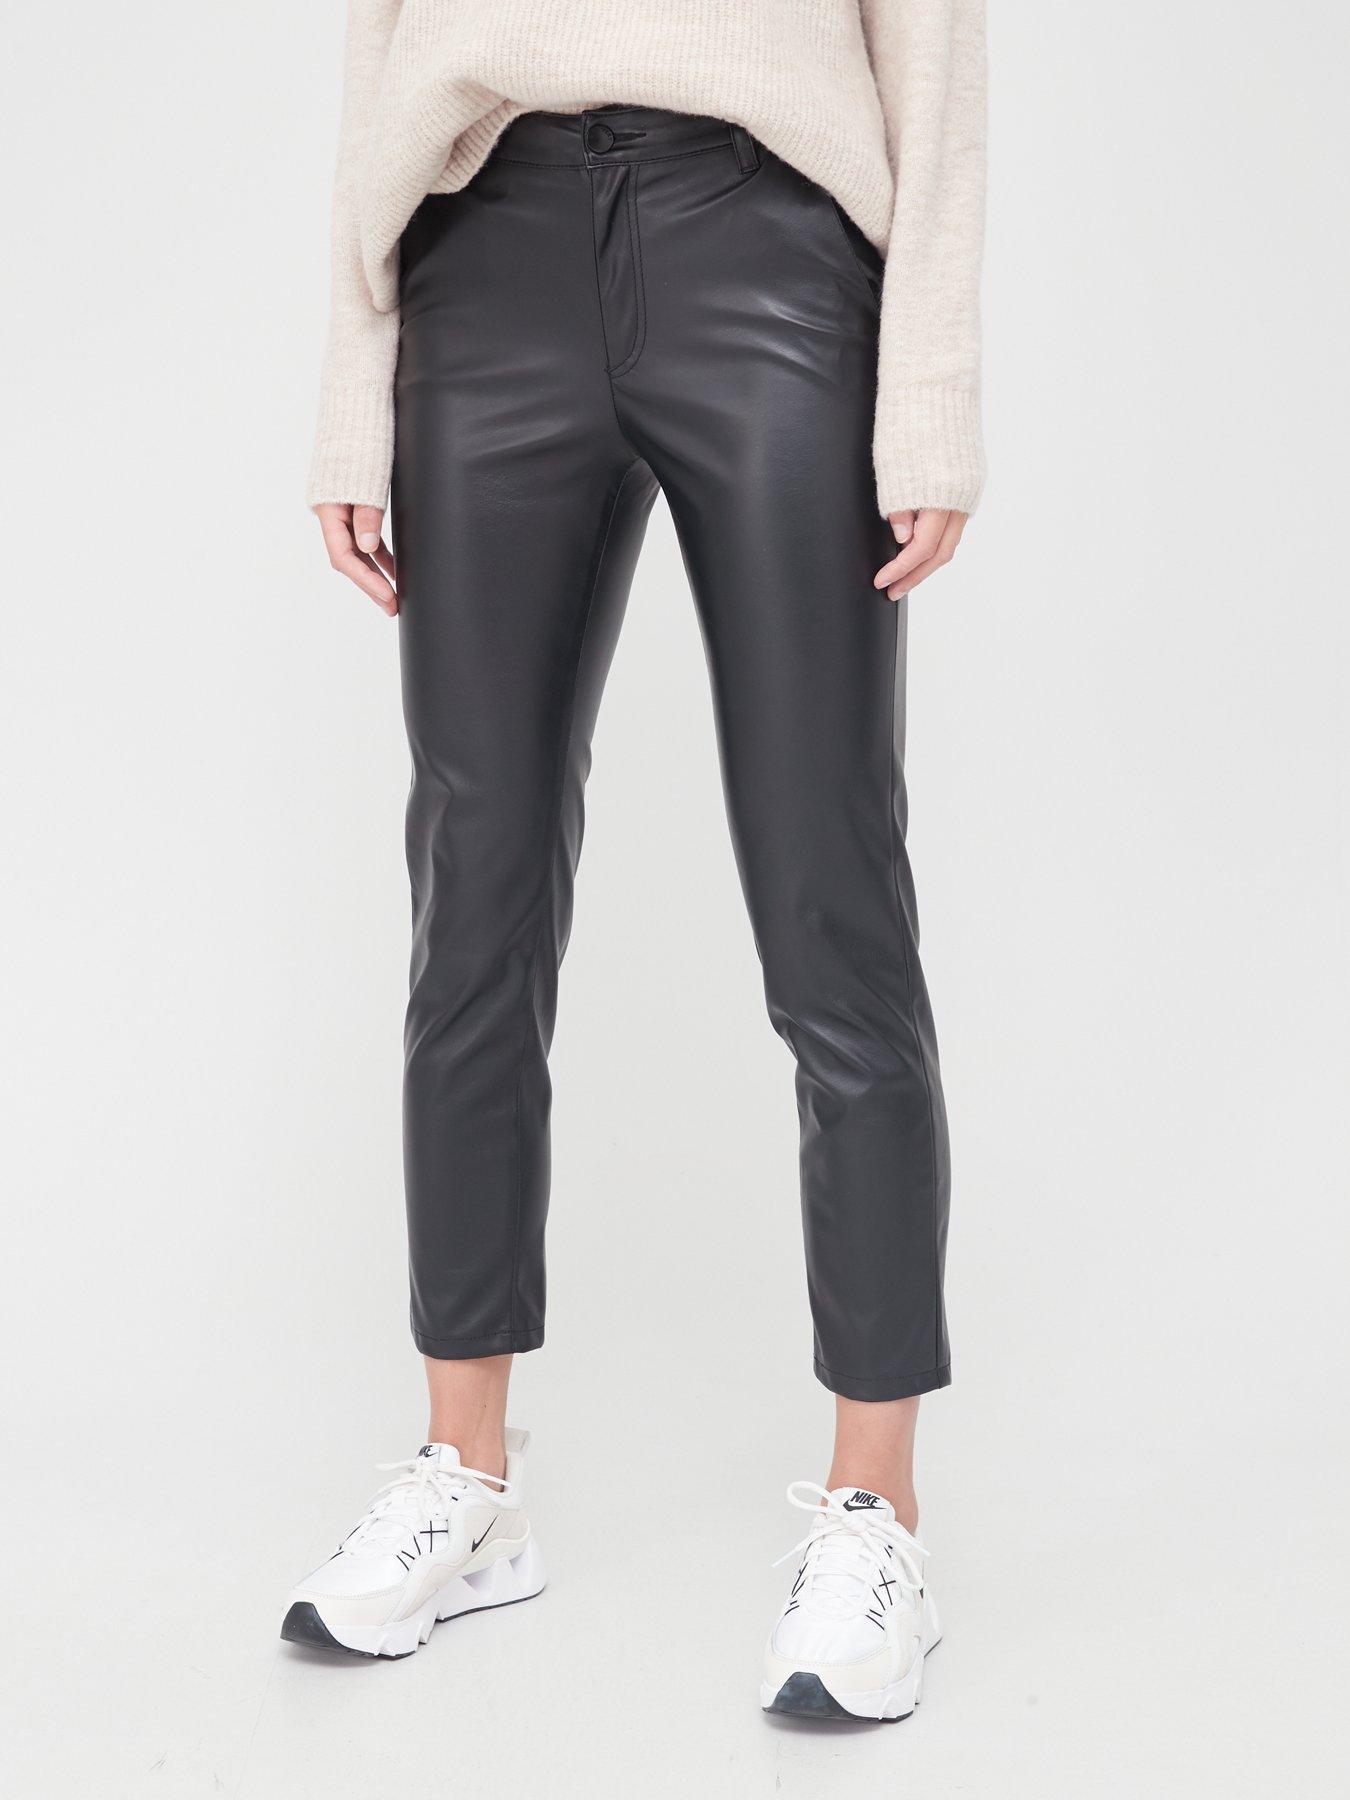 black cigarette trousers new look